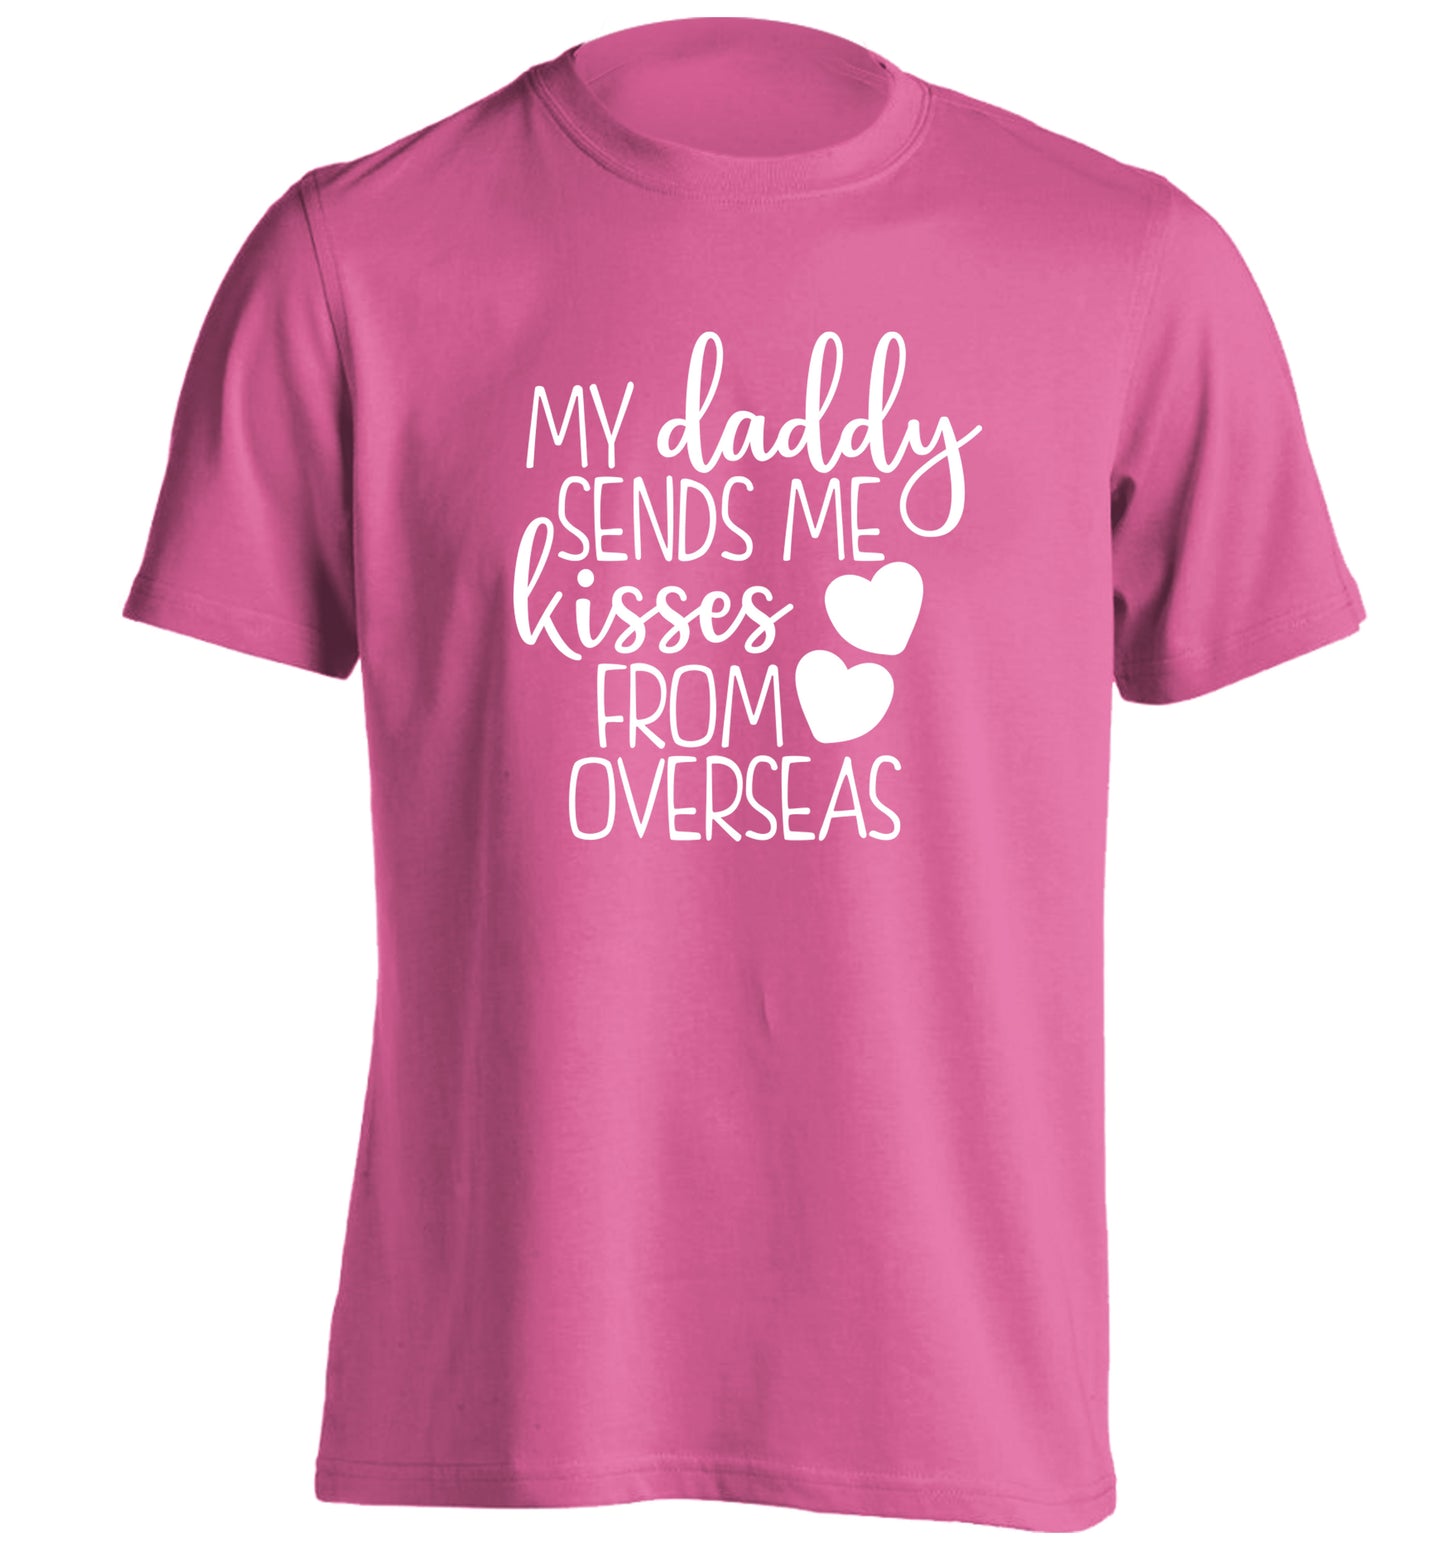 My daddy sends me kisses from overseas adults unisex pink Tshirt 2XL